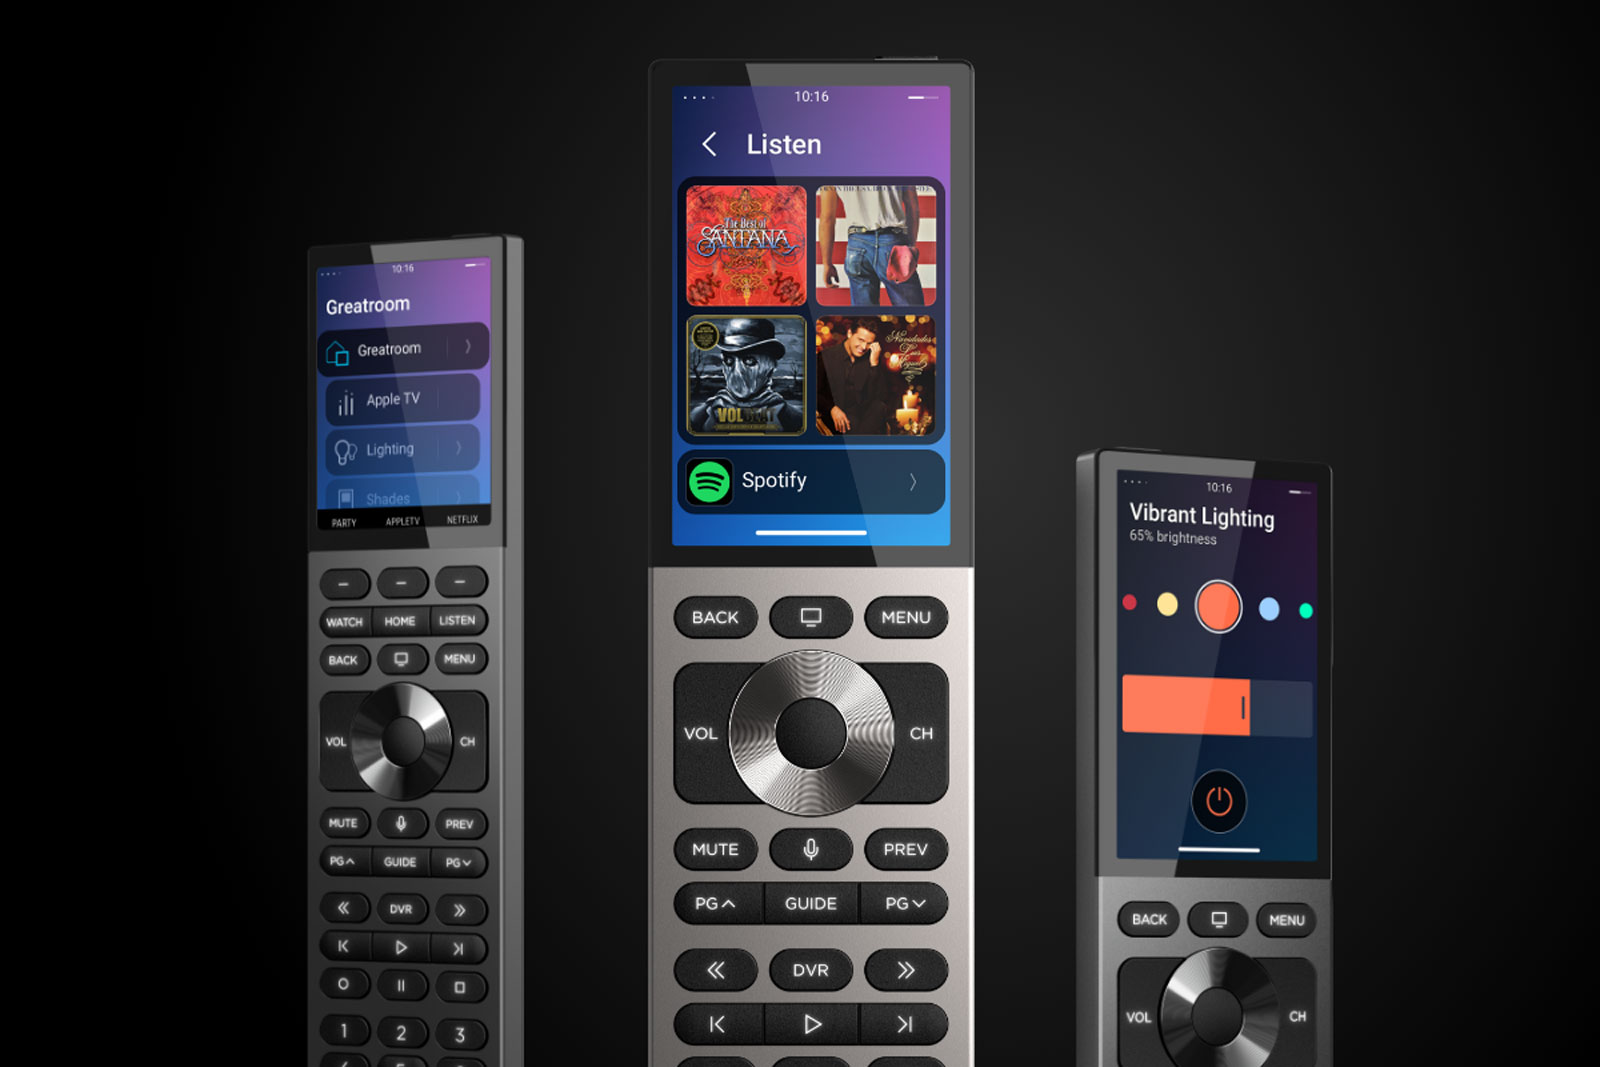 Halo Remote Family by Control 4